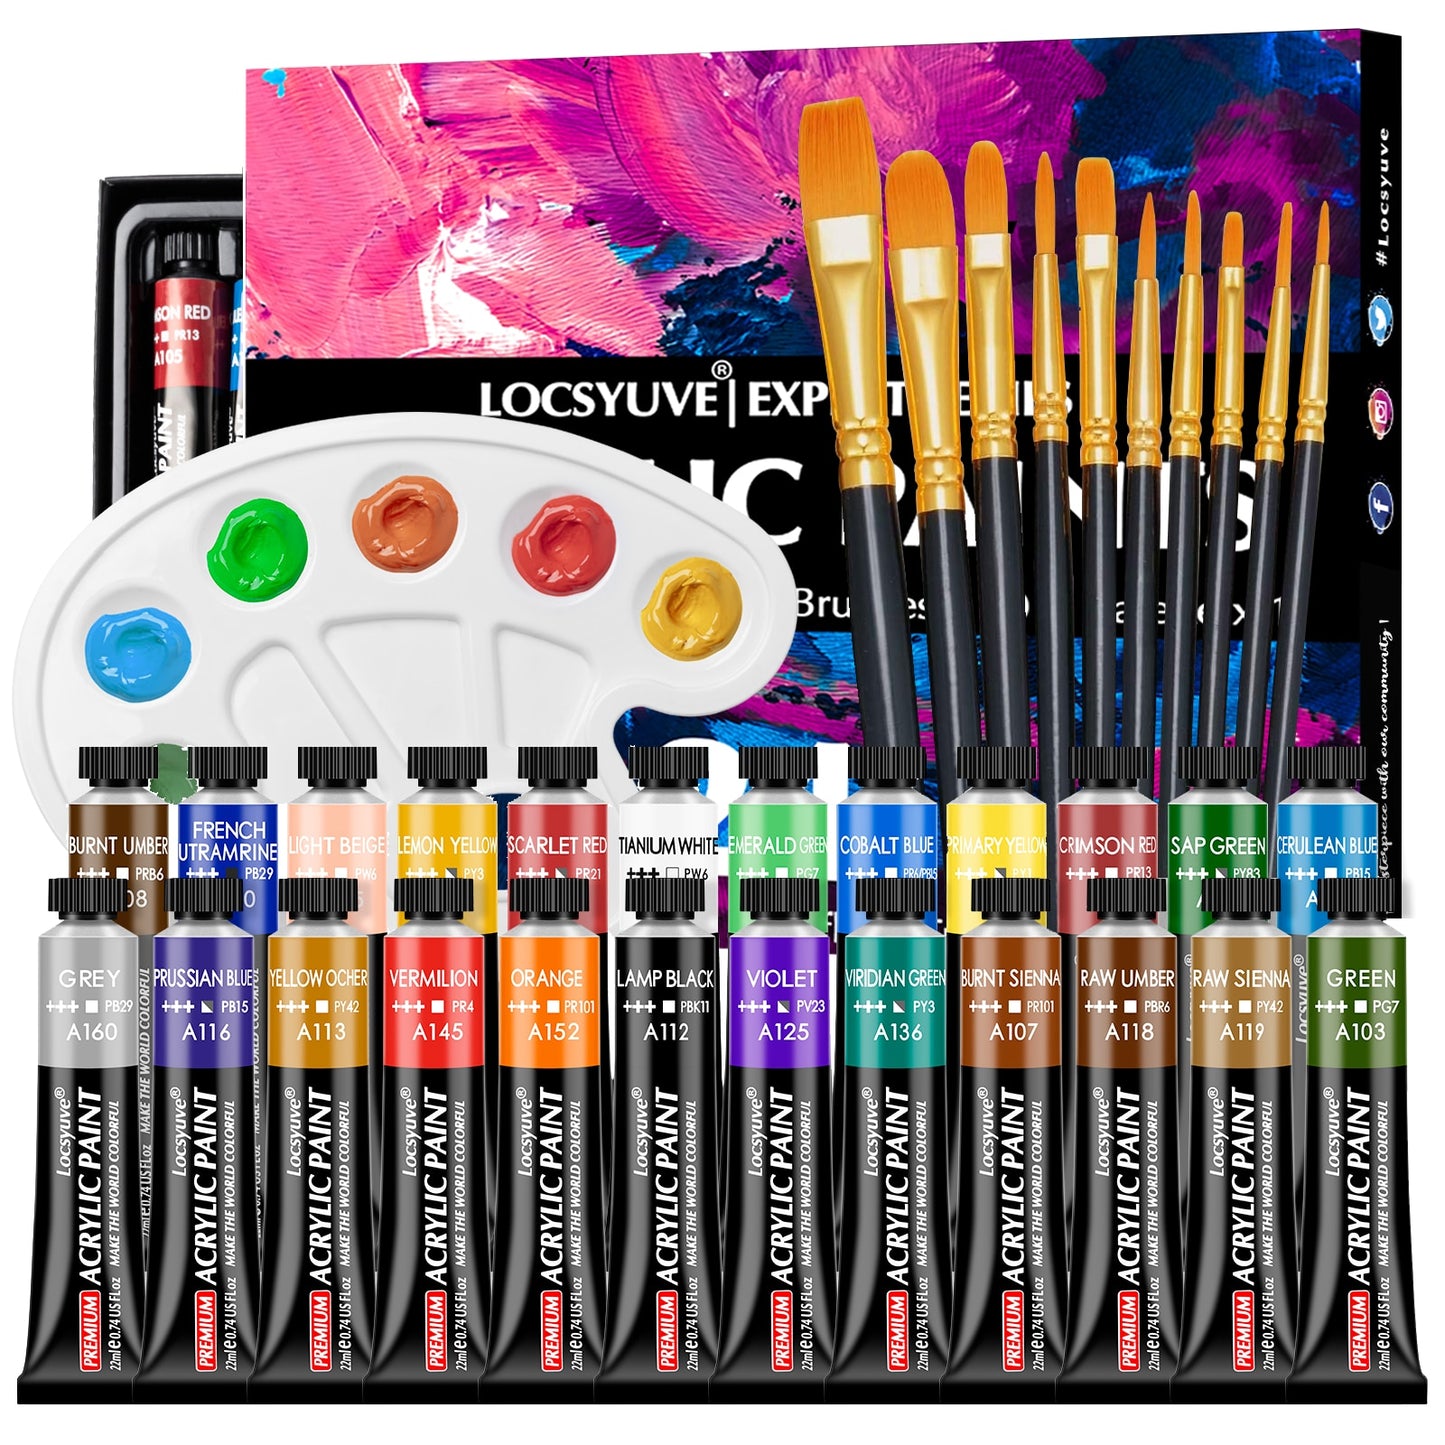 Acrylic Paint 36 Colors 22ml Tube Acrylic Paint Set, Paint For Fabric,  Clothing, Painting, Rich Pigments For Artists Painting